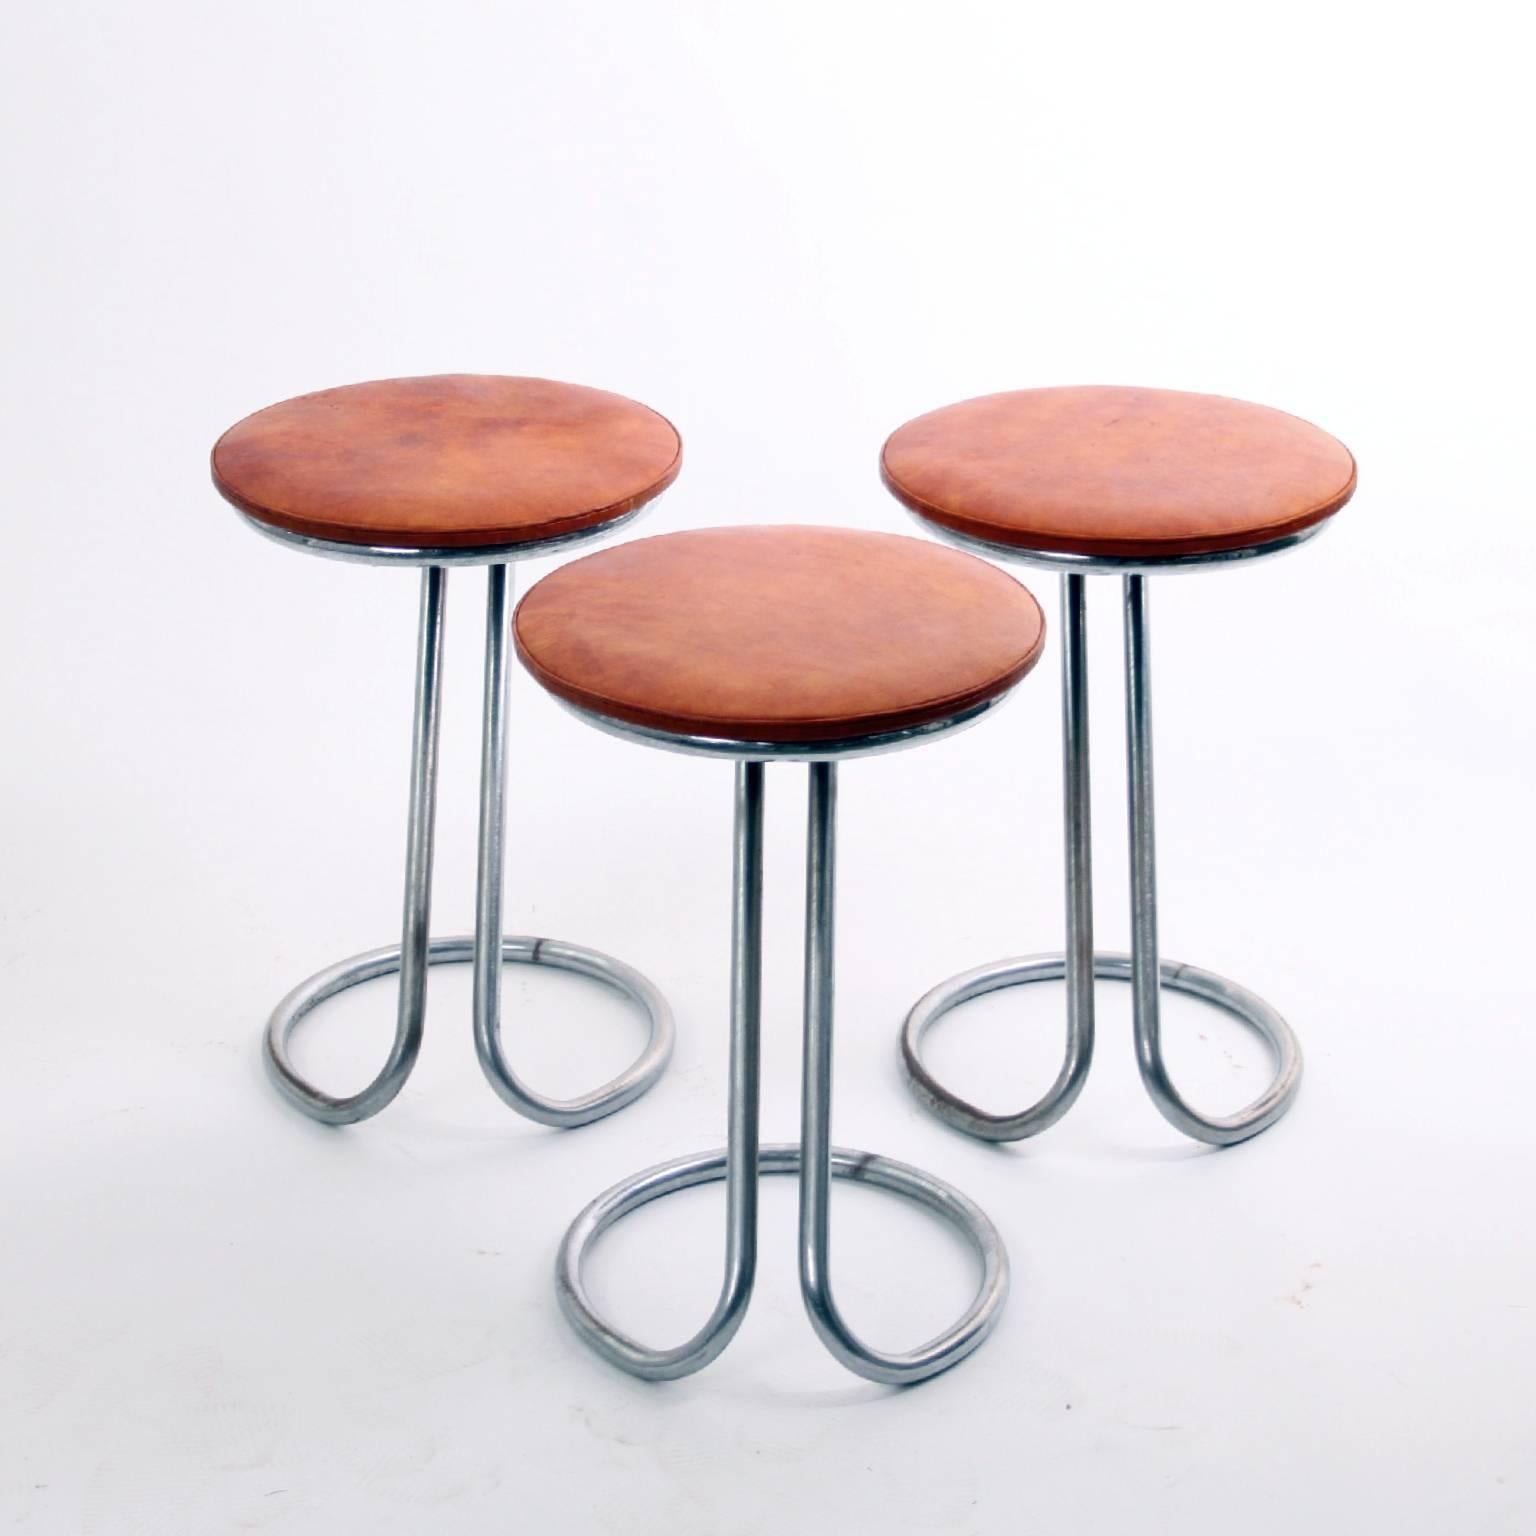 American Rare Z-Stools by Gilbert Rohde with Leather Seats, 1933